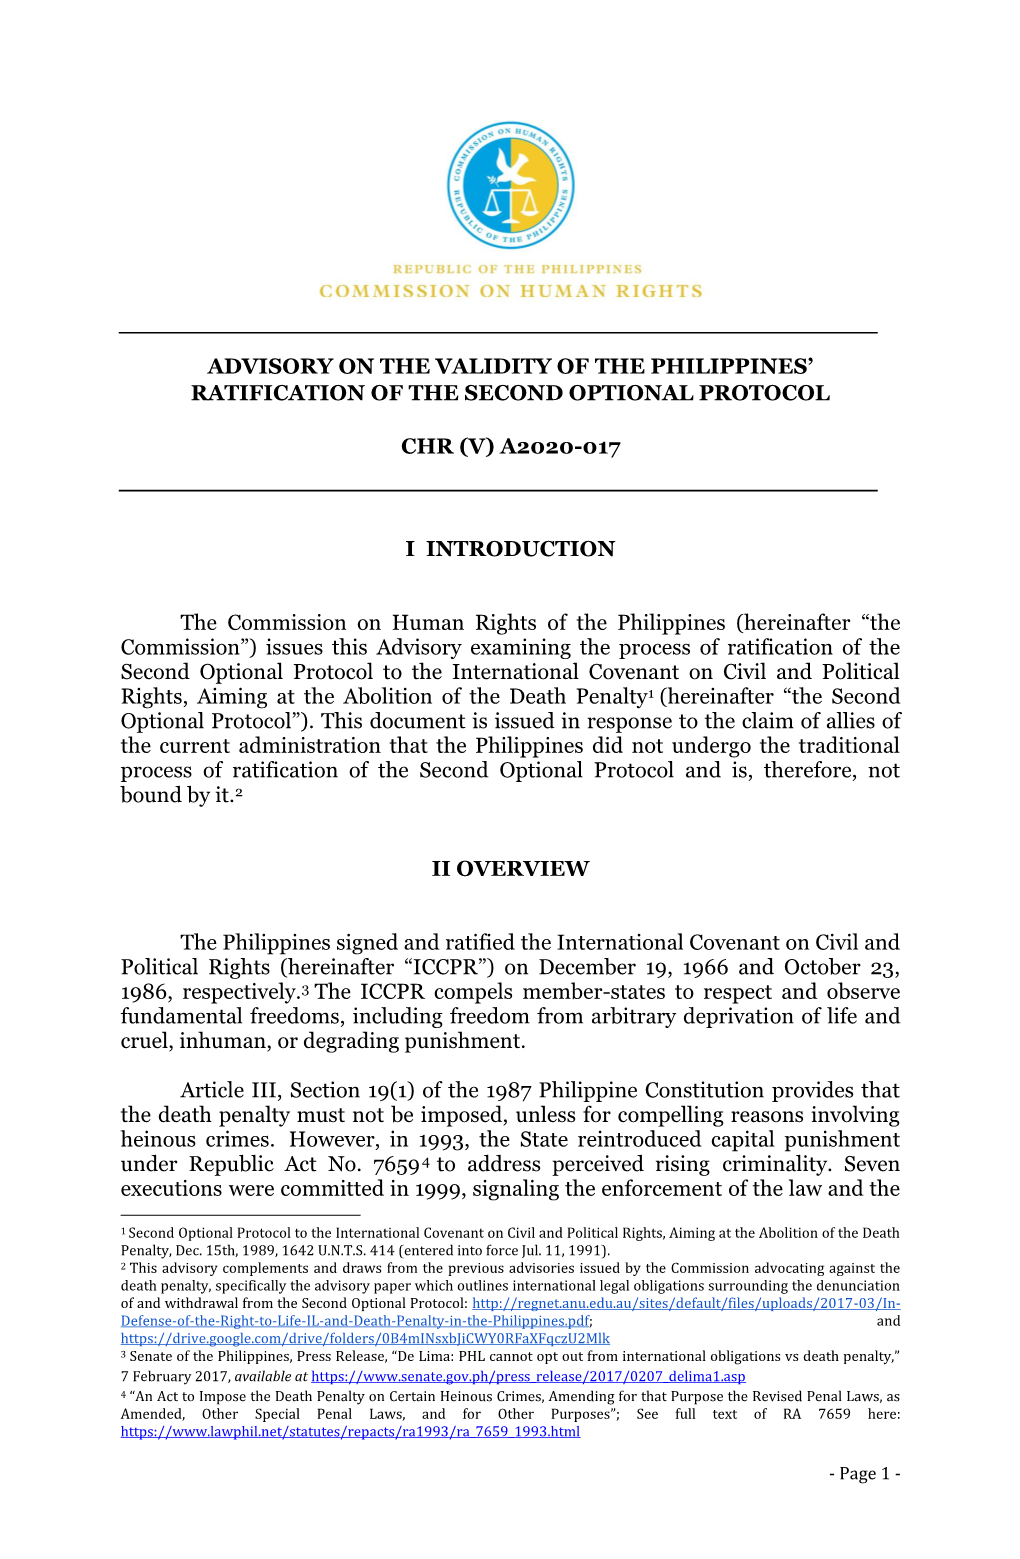 ADVISORY on the VALIDITY of the PHILIPPINES' RATIFICATION of the SECOND OPTIONAL PROTOCOL CHR (V) A2020-017 I INTRODUCTION Th